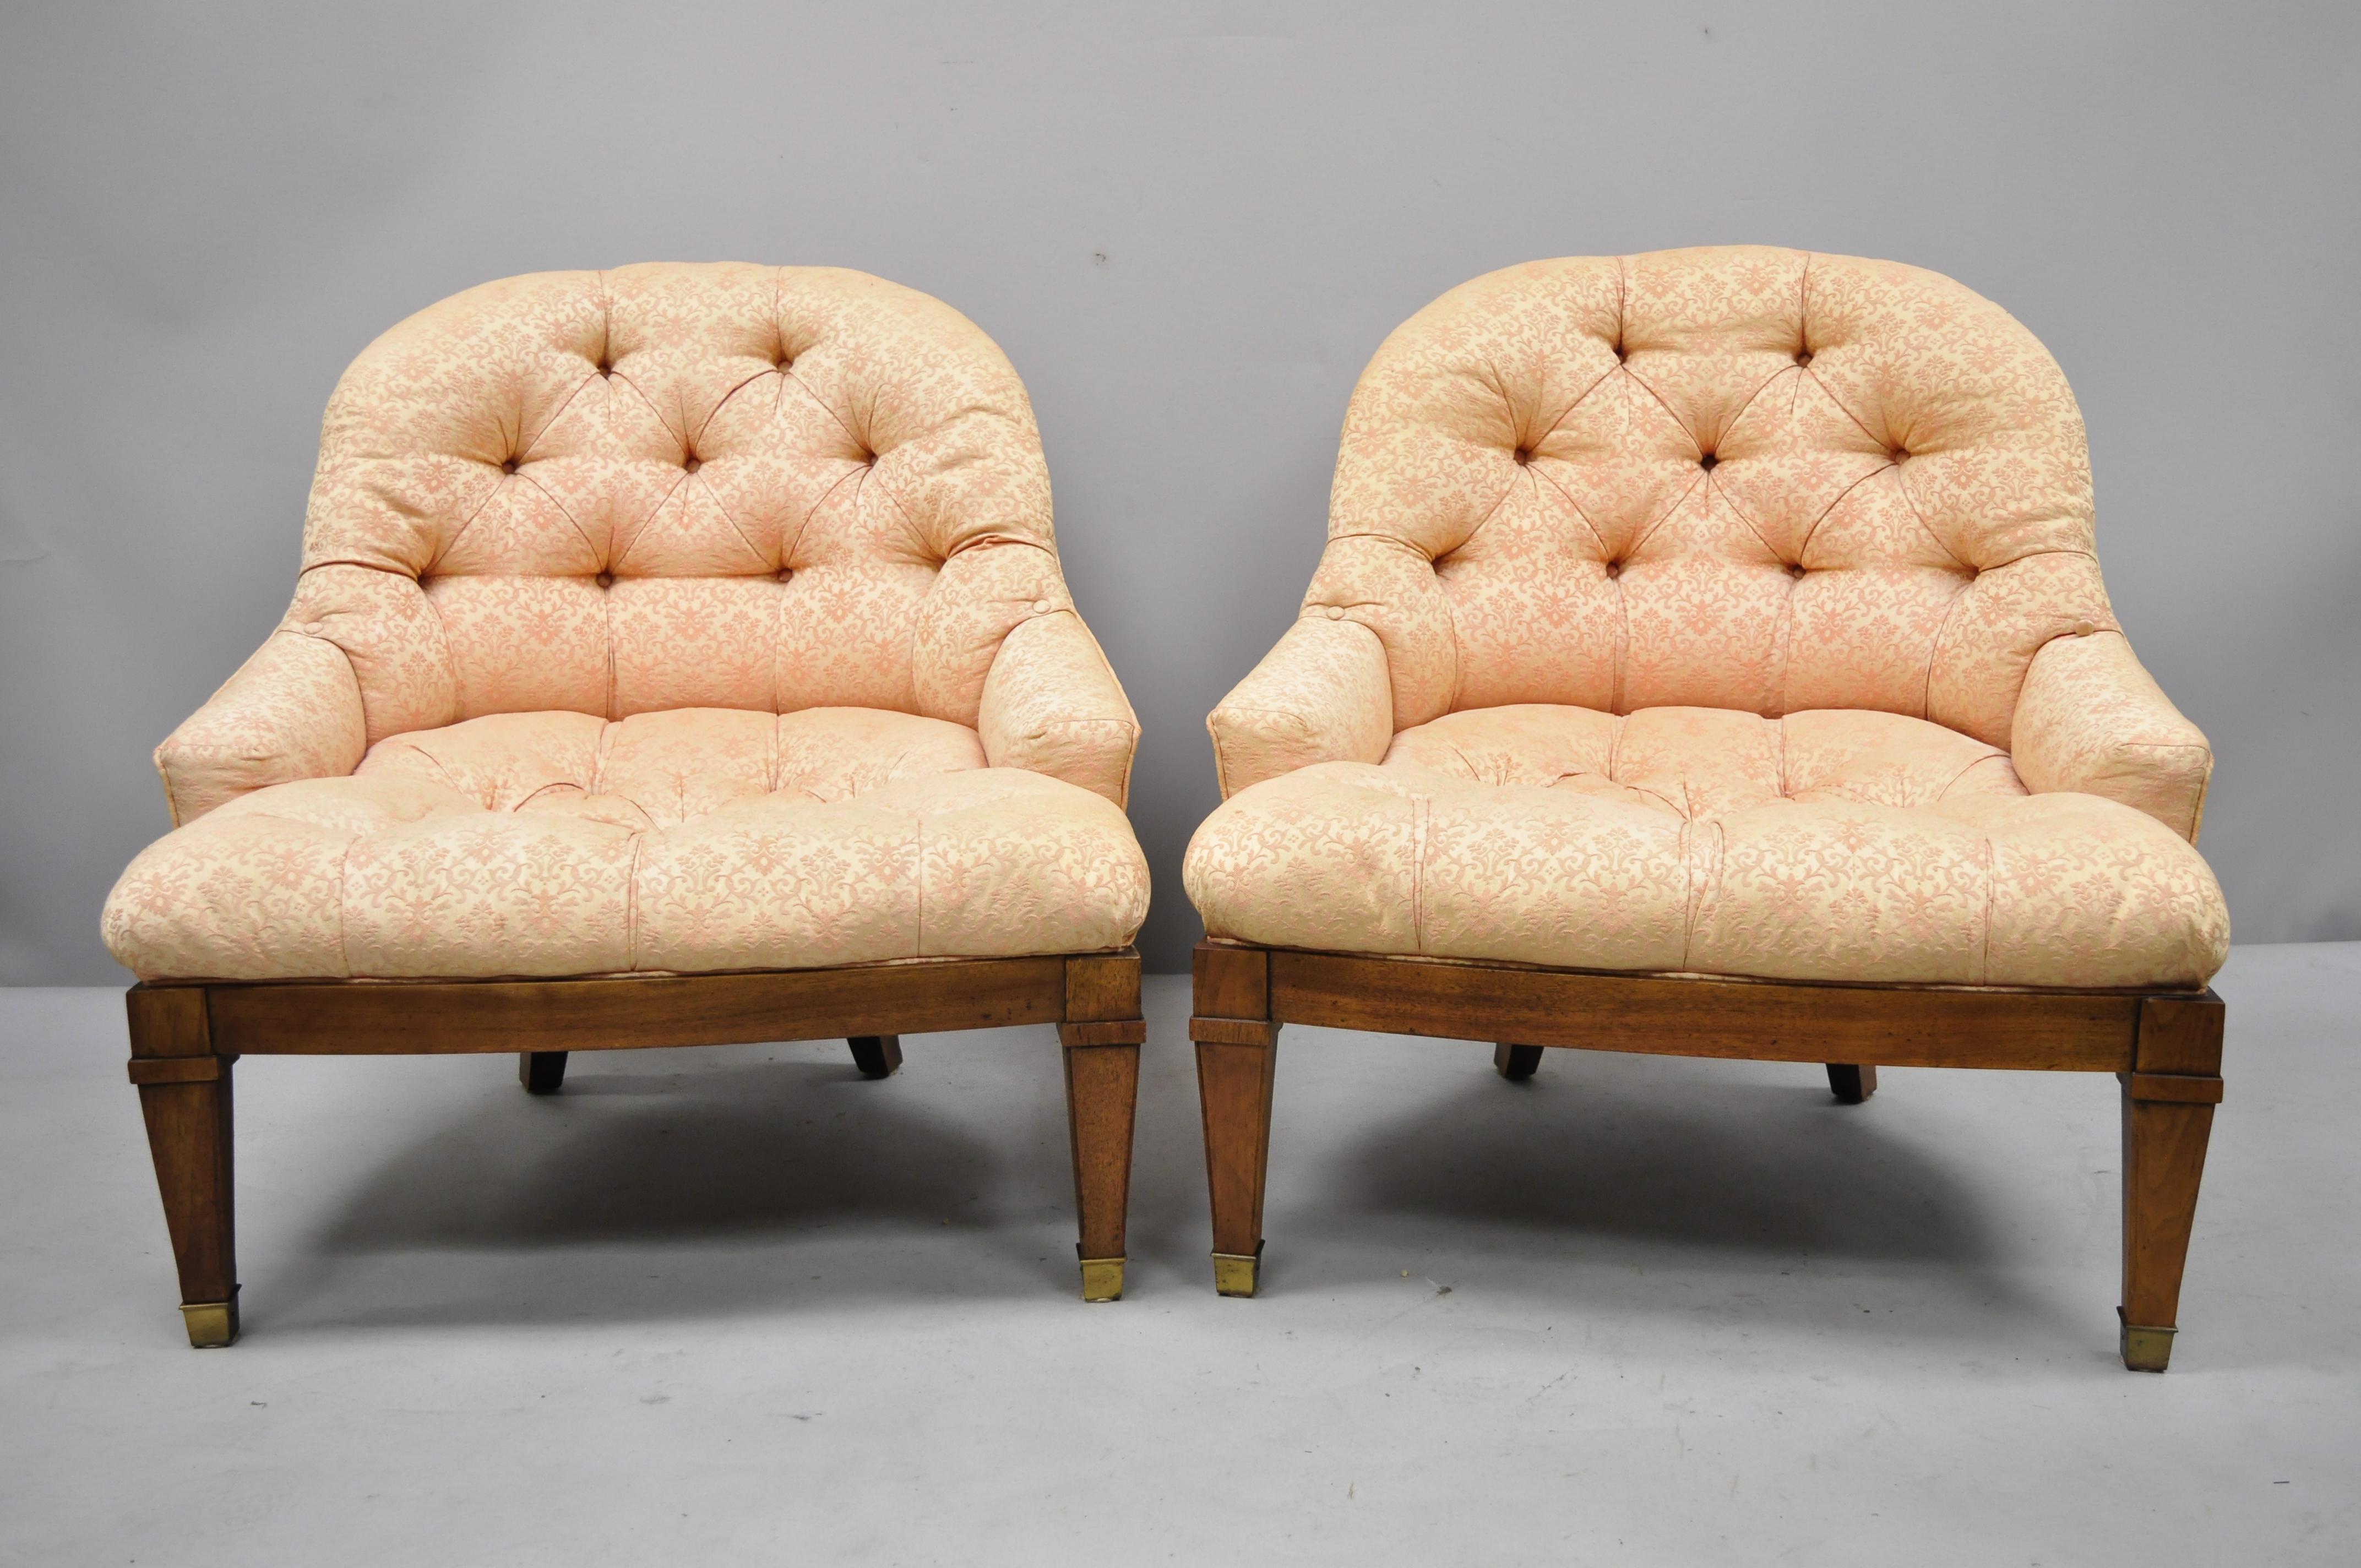 Pair of Baker Tufted Barrel Back Slipper Salon Lounge Chairs Brass Feet. Items feature brass capped feet, low and wide form, tufted fabric, solid wood frame, tapered legs, quality American craftsmanship, great style and form. Circa mid 20th Century.